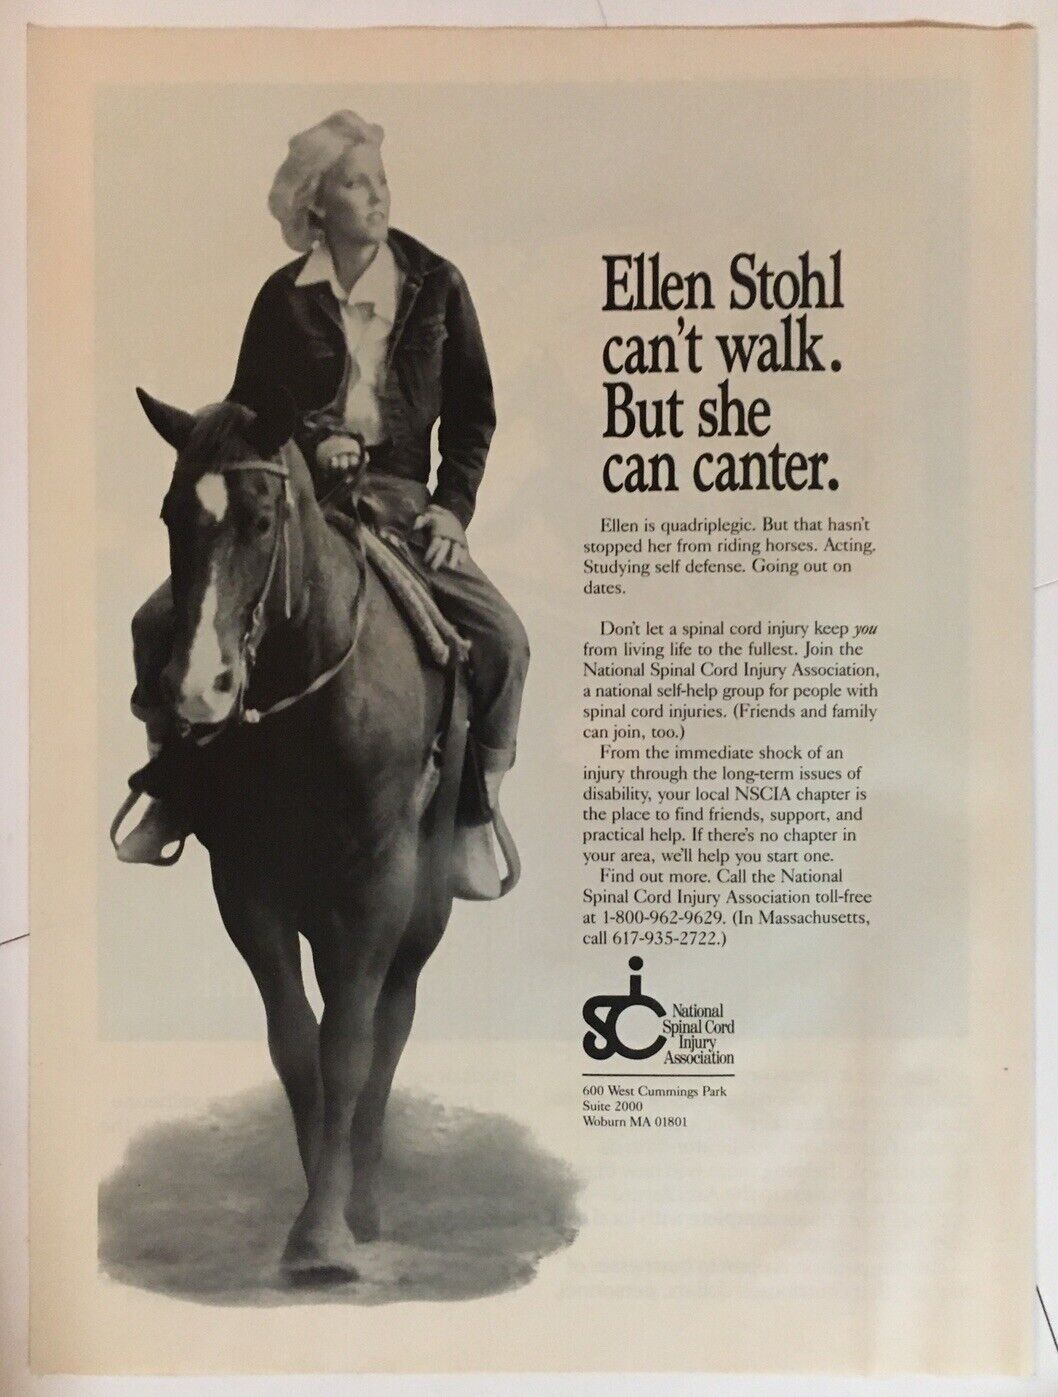 Ellen Stohl Horse Riding Spinal Cord 1989 Vintage Print Ad 8x11In. Wall Decor